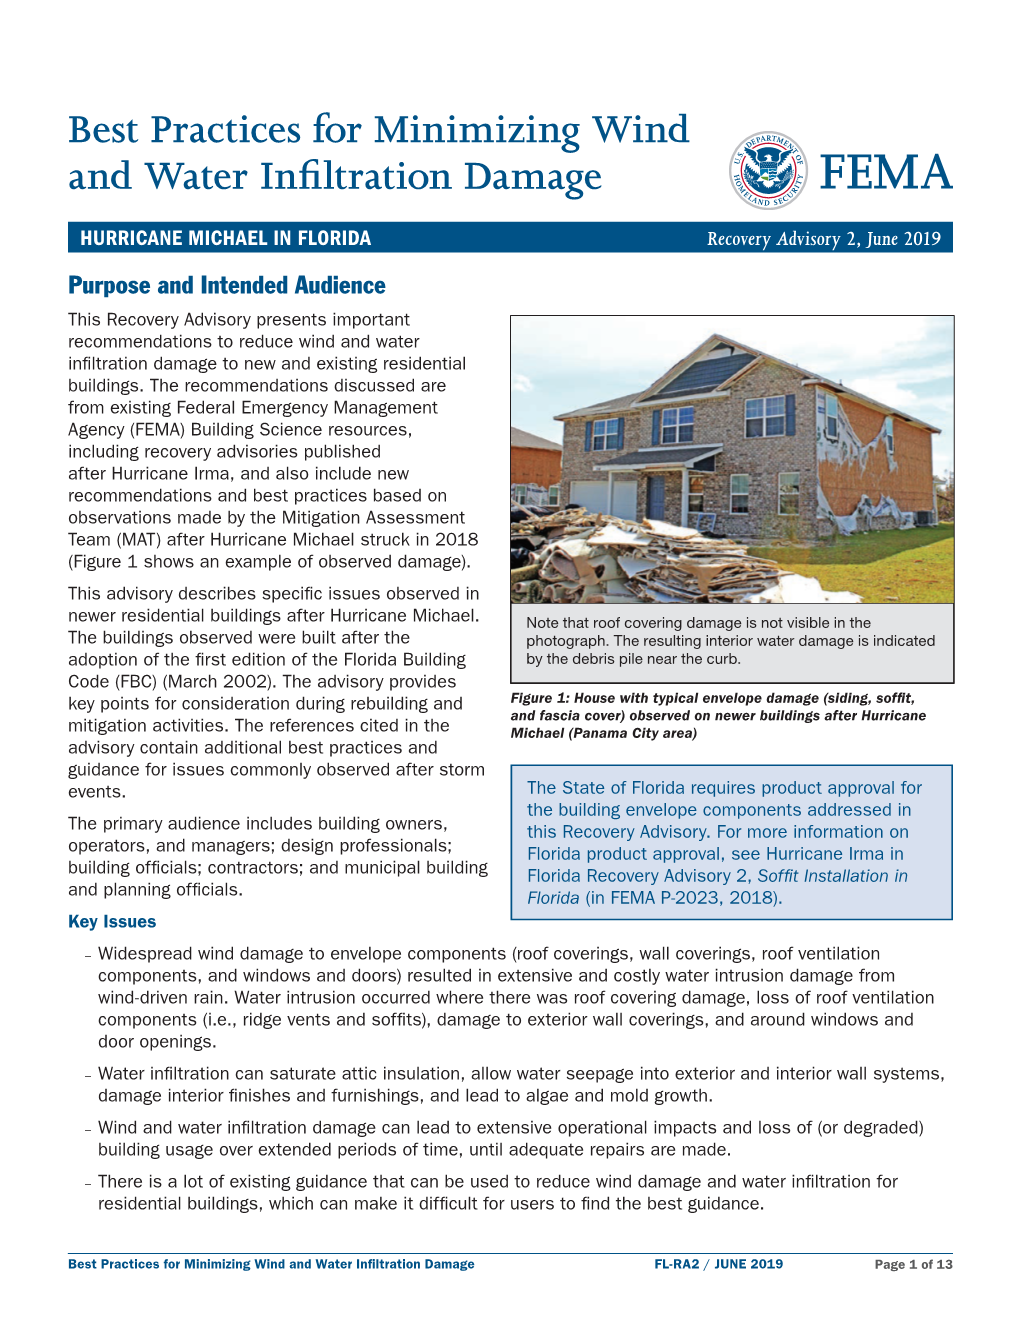 Best Practices for Minimizing Wind and Water Infiltration Damage